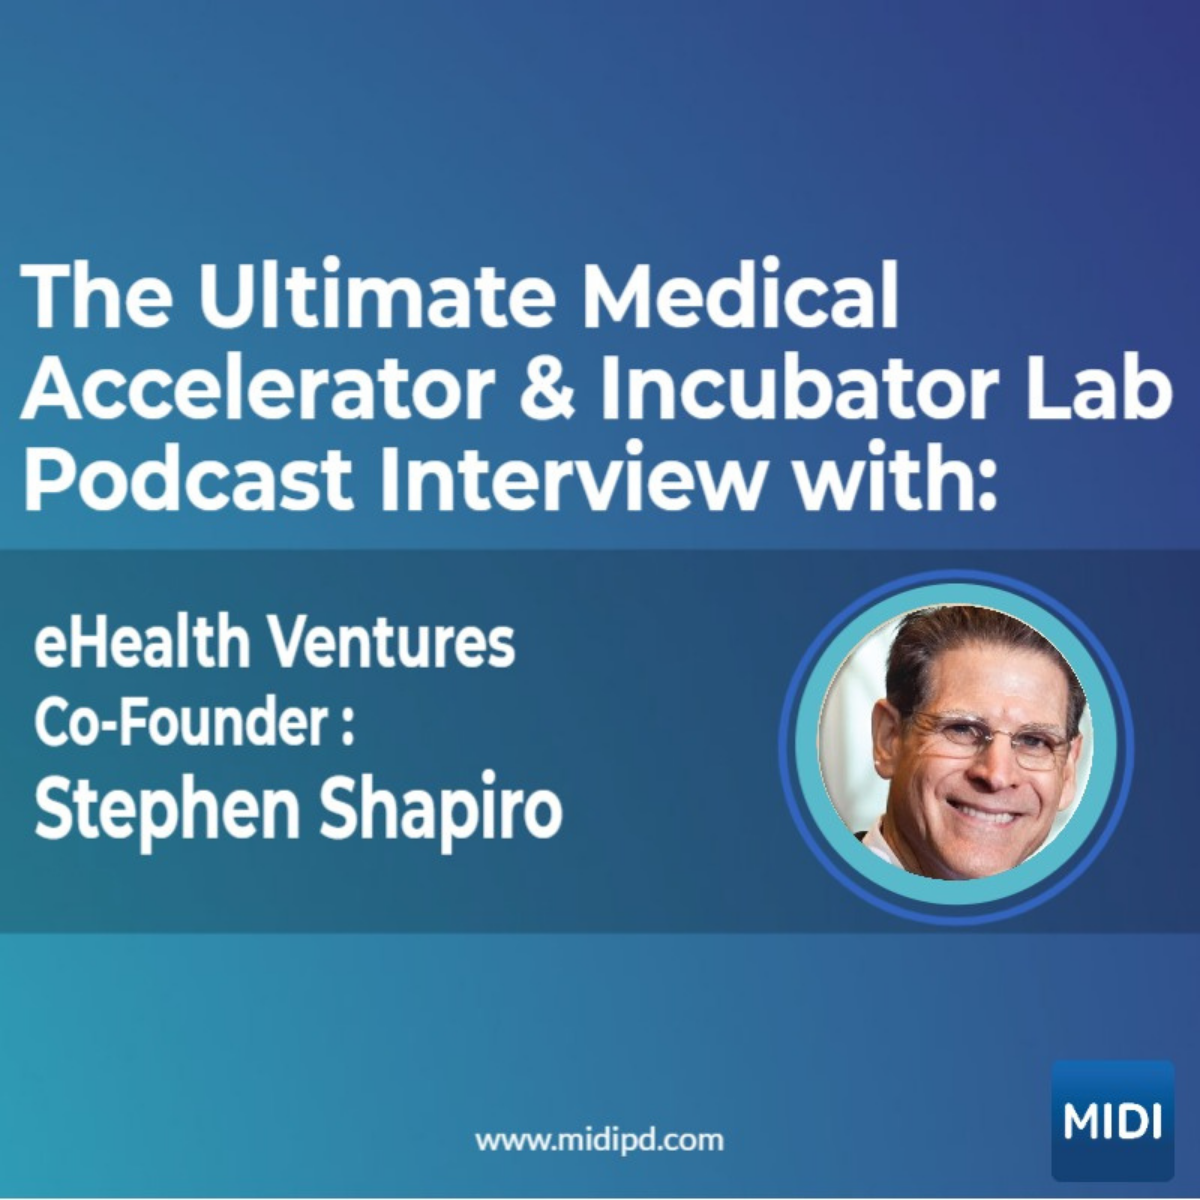 eHealth Ventures: Global Leading Investment Incubator for Early Stage Digital Health Companies}